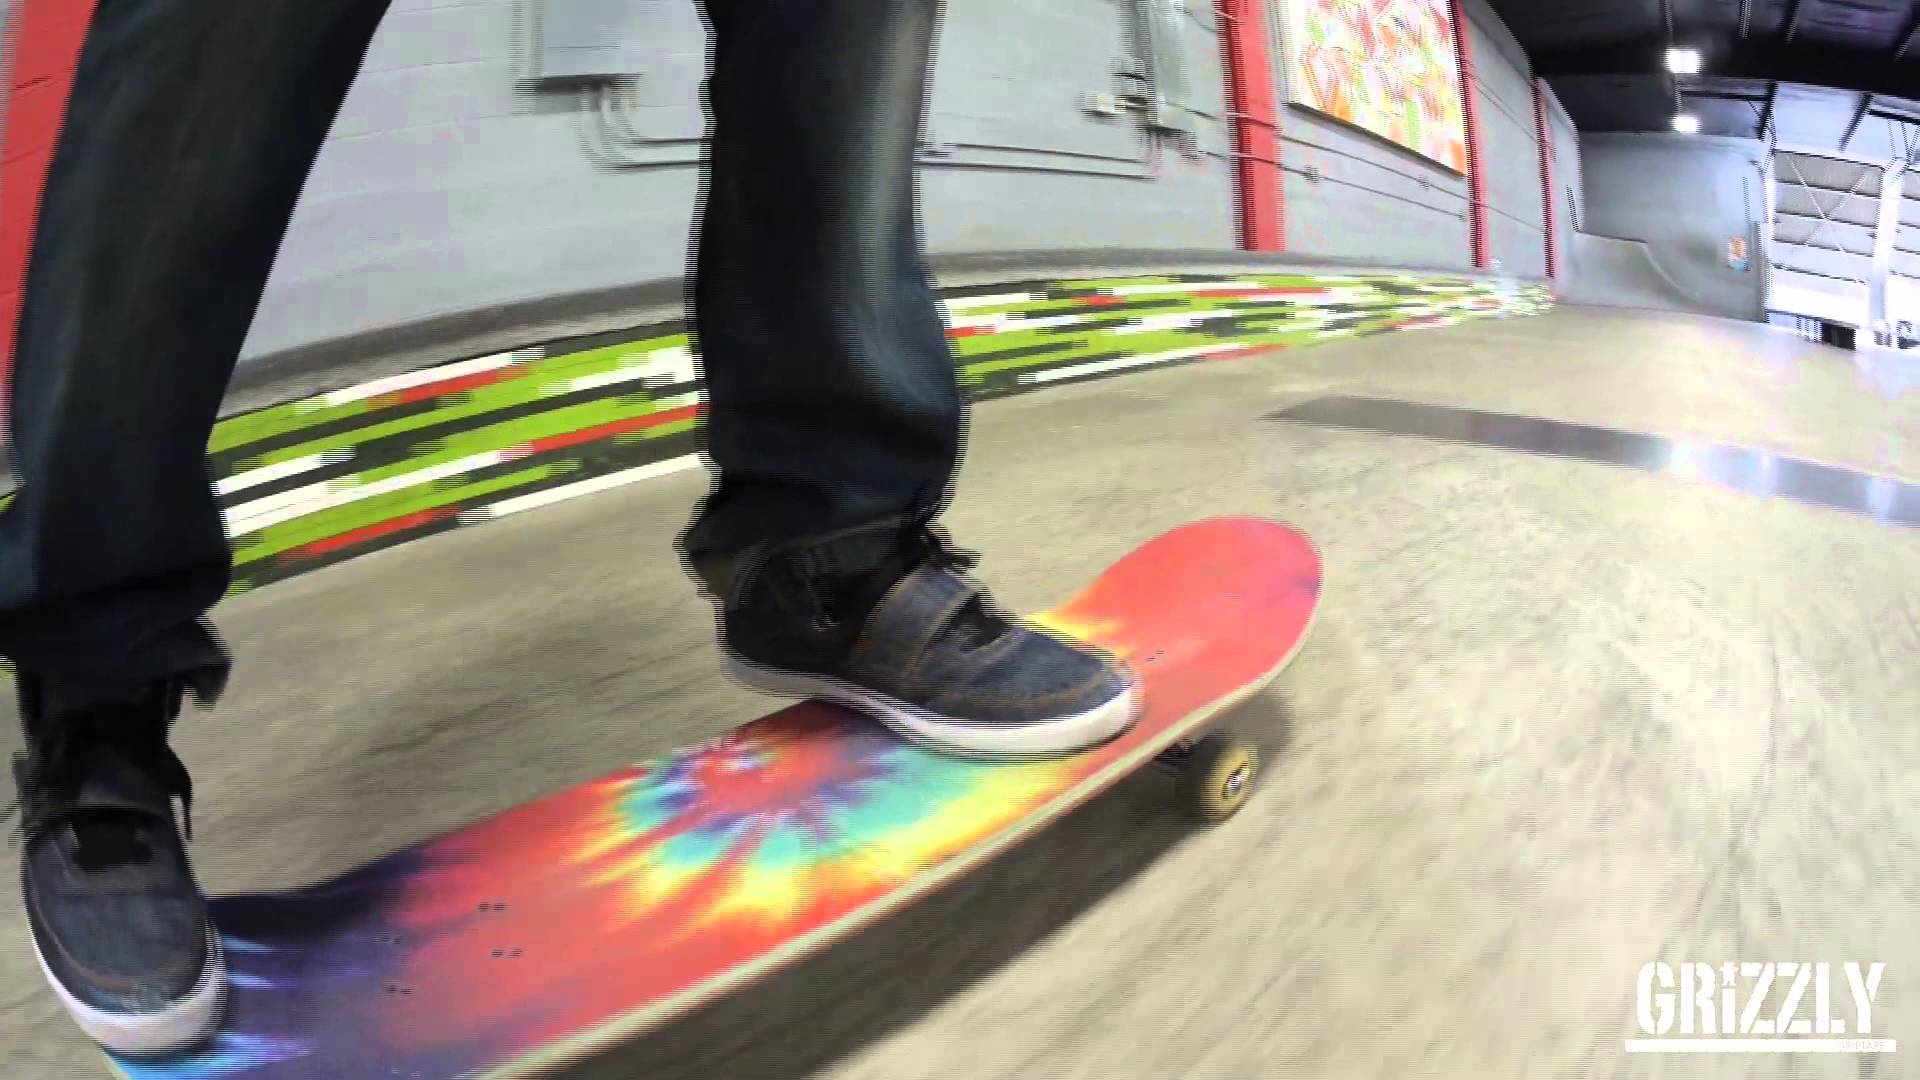 Grizzly grip tape tie dye Commercial with Torey Pudwill